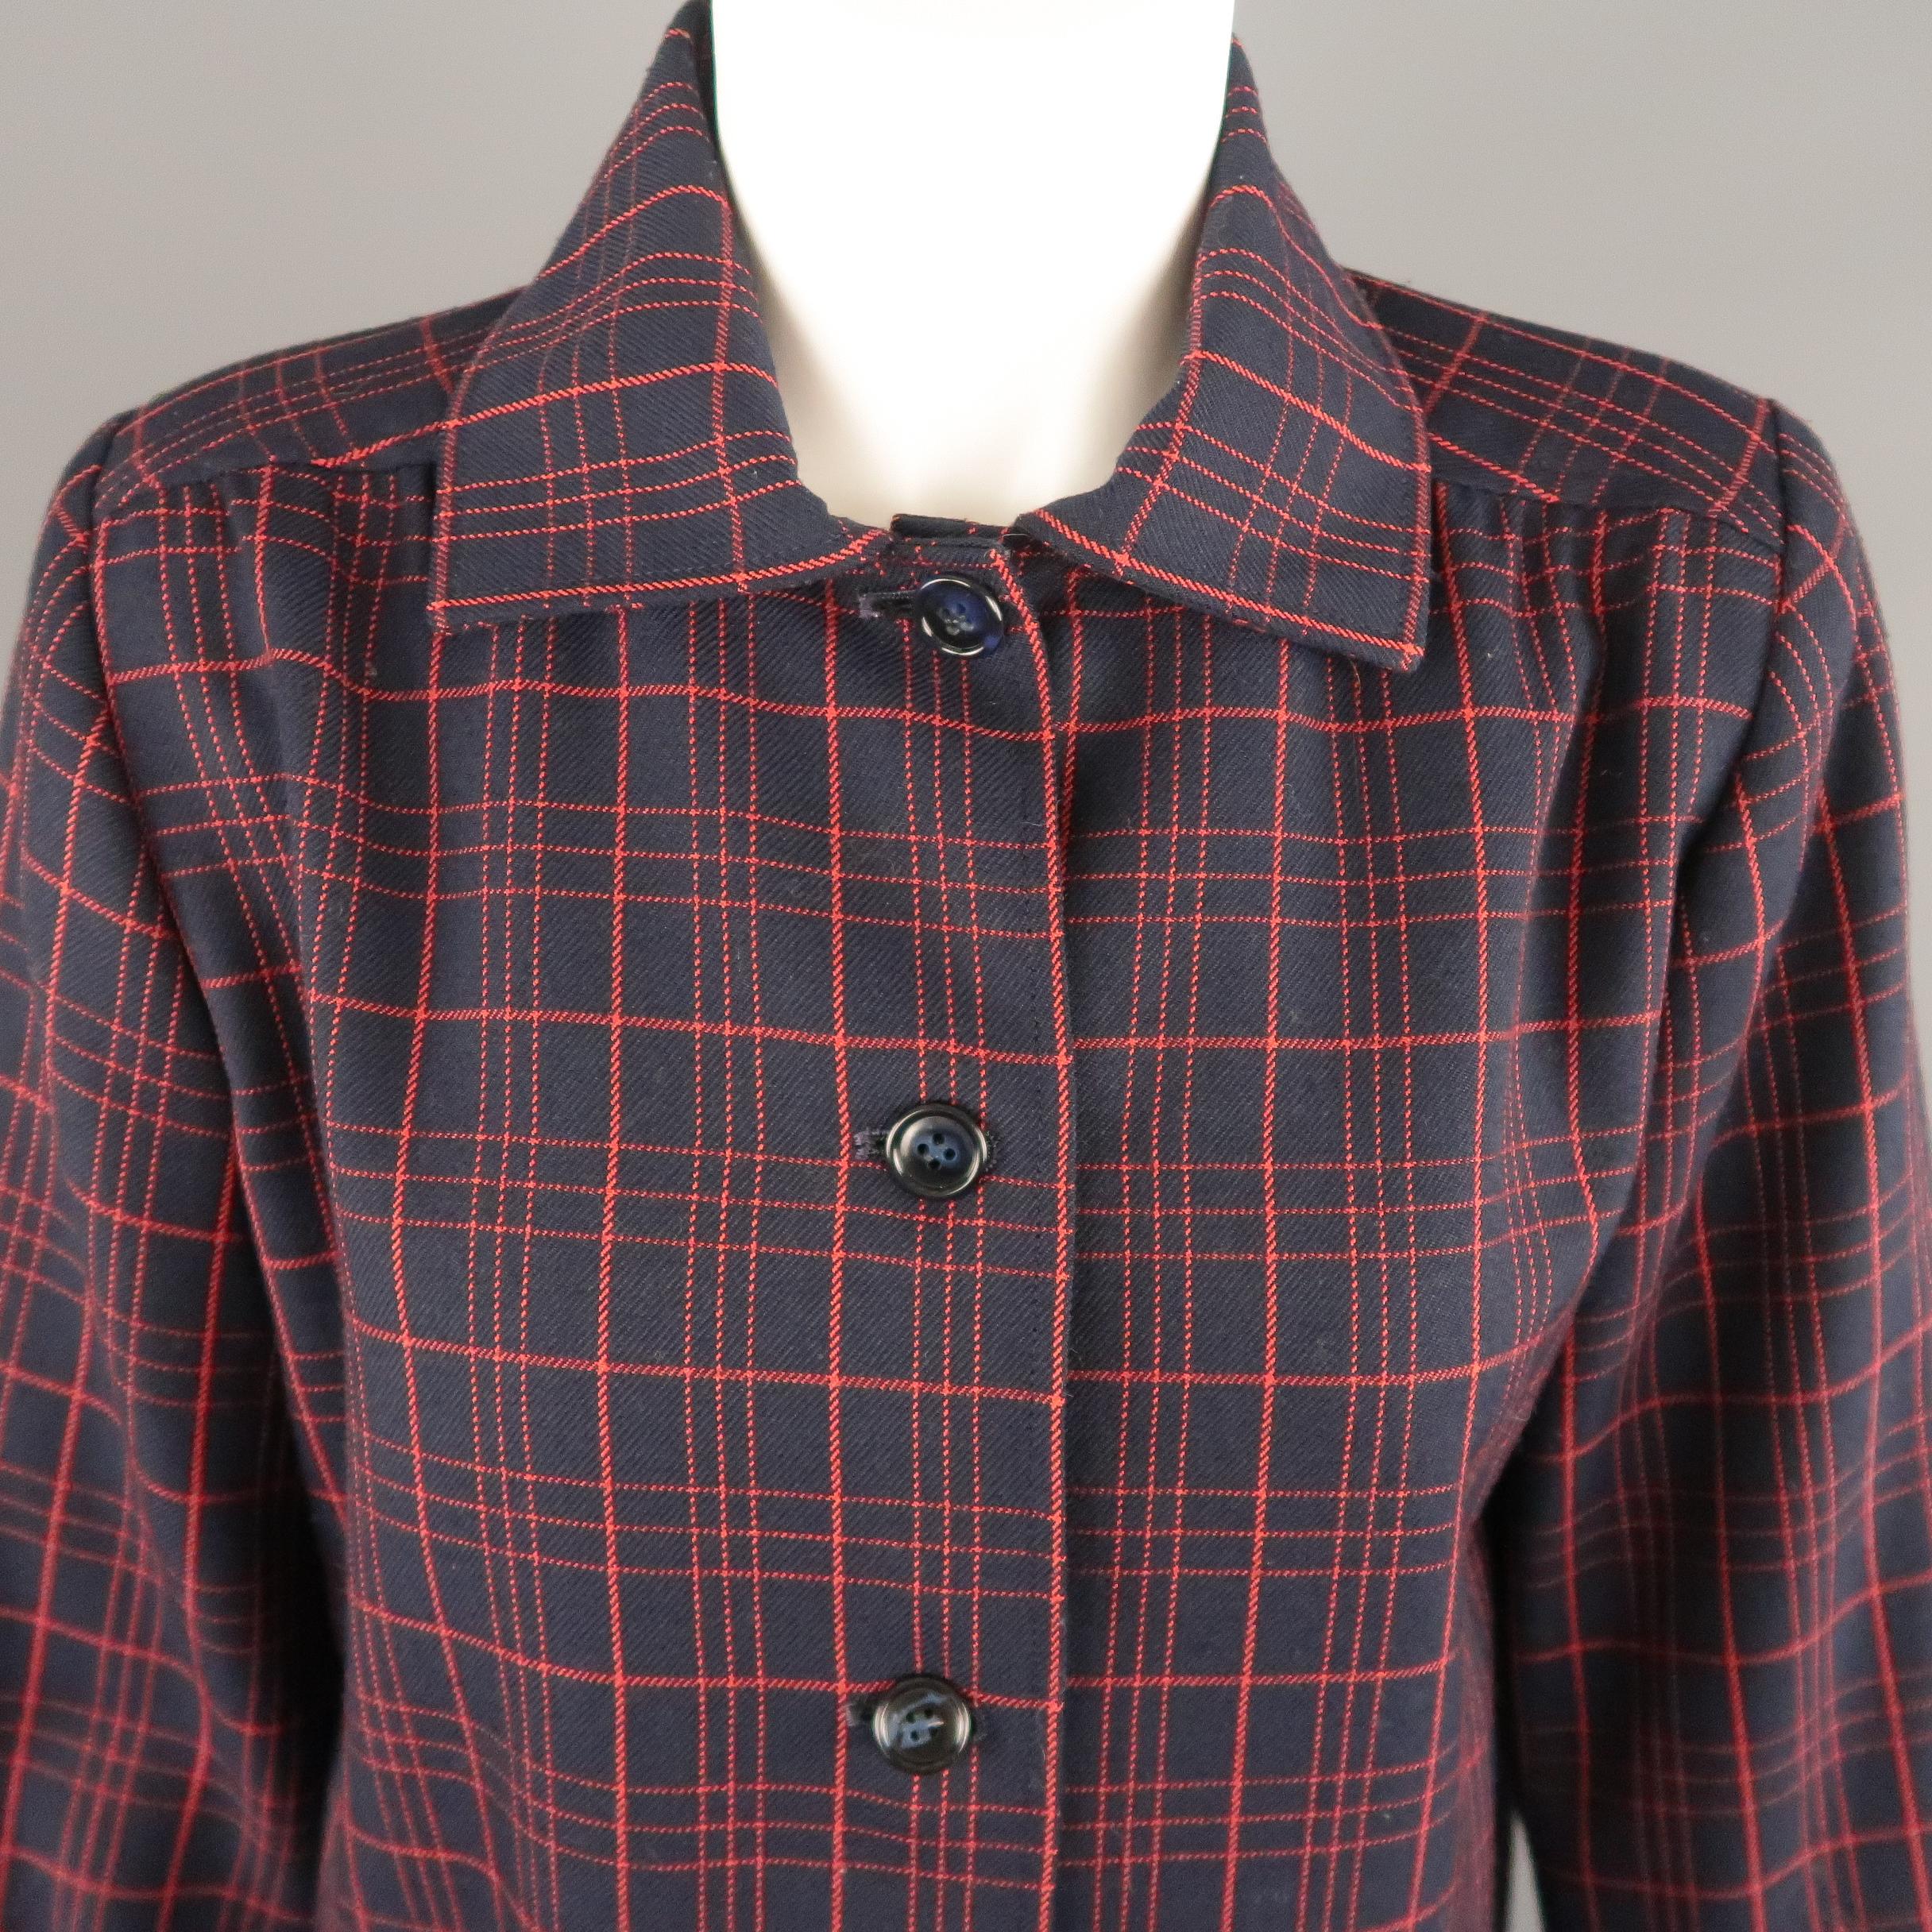 Vintage SAINT LAURENT Rive Gauche jacket comes in navy and red windowpane plaid twill with a pointed collar, button up front, patch pockets, and gathered sleeves. Made in USA.
 
Very Good Pre-Owned Condition.
Marked: (no size)
 
Measurements:
